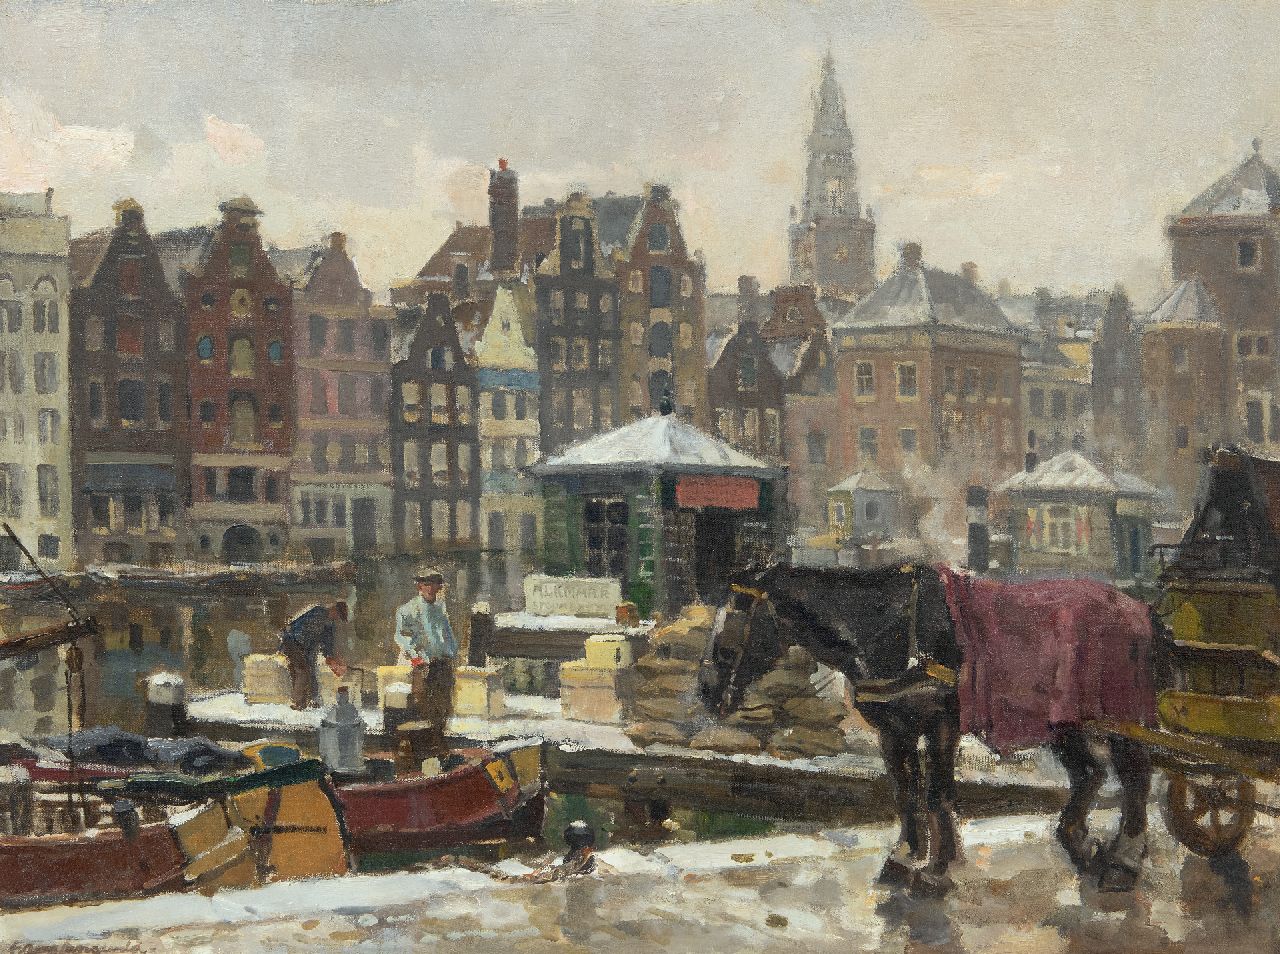 Langeveld F.A.  | Franciscus Arnoldus 'Frans' Langeveld | Paintings offered for sale | The Damrak in Amsterdam, oil on canvas 61.0 x 81.2 cm, signed l.l.